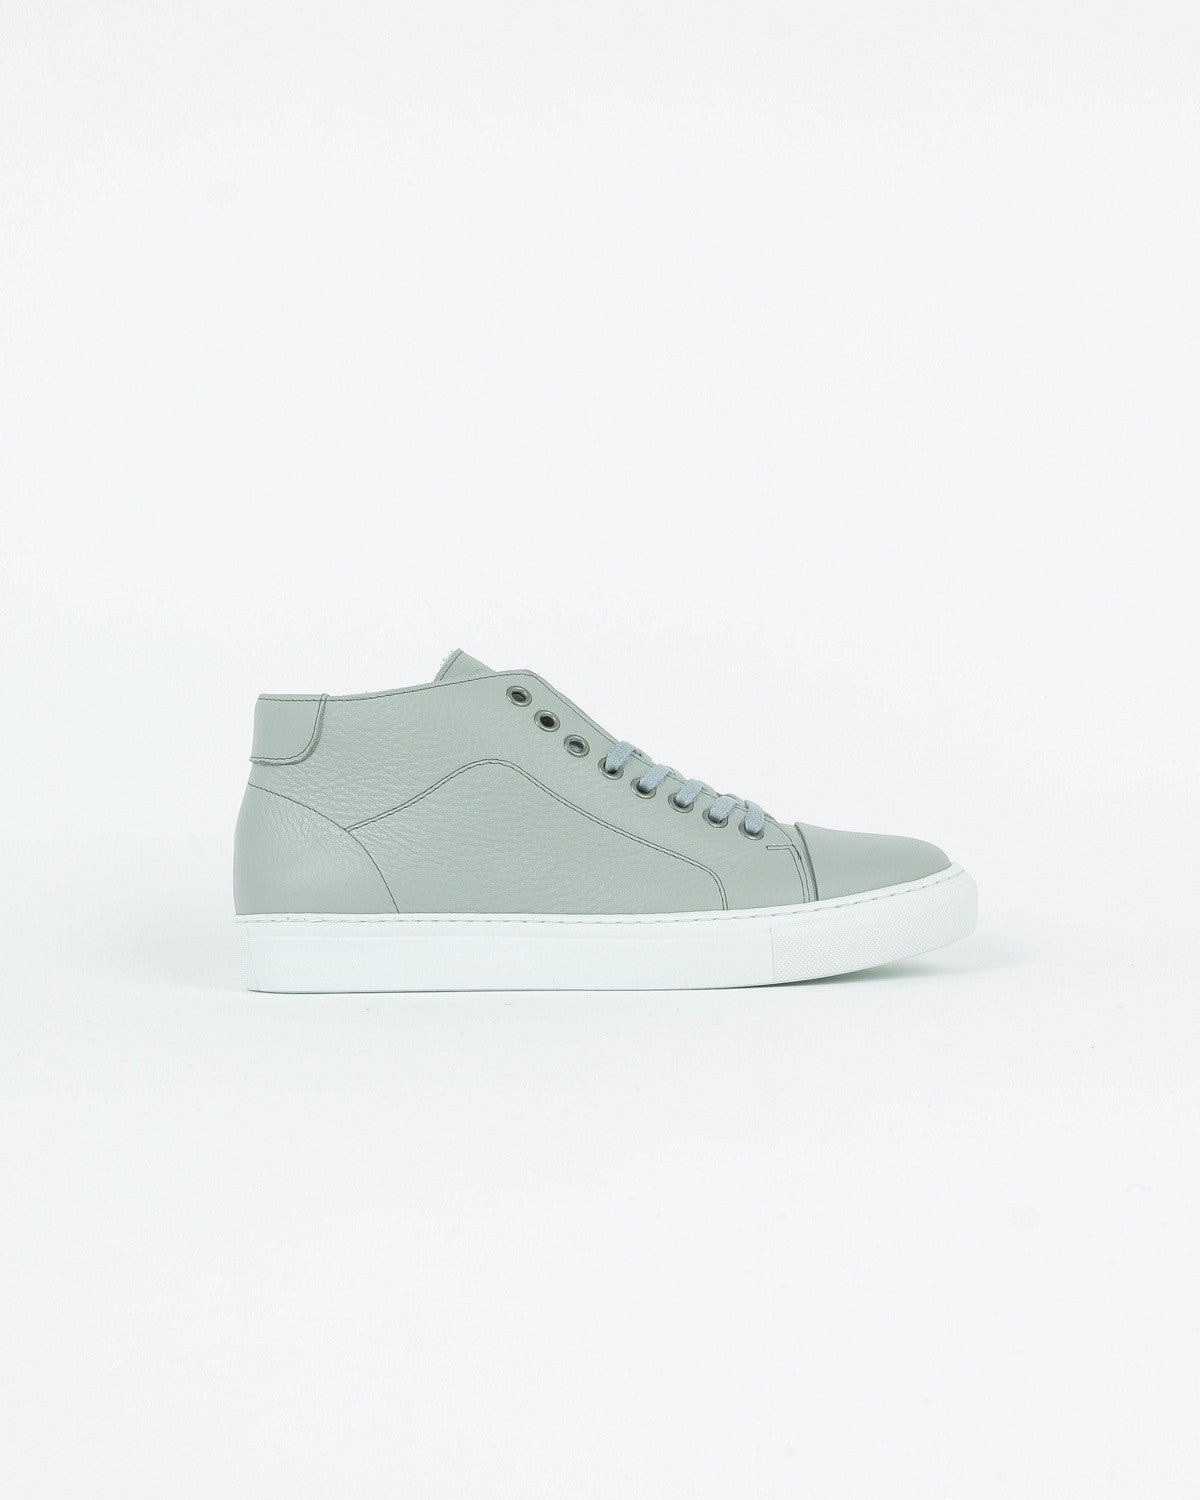 garment project_classic lace mid sneaker_grey floater_view_1_3